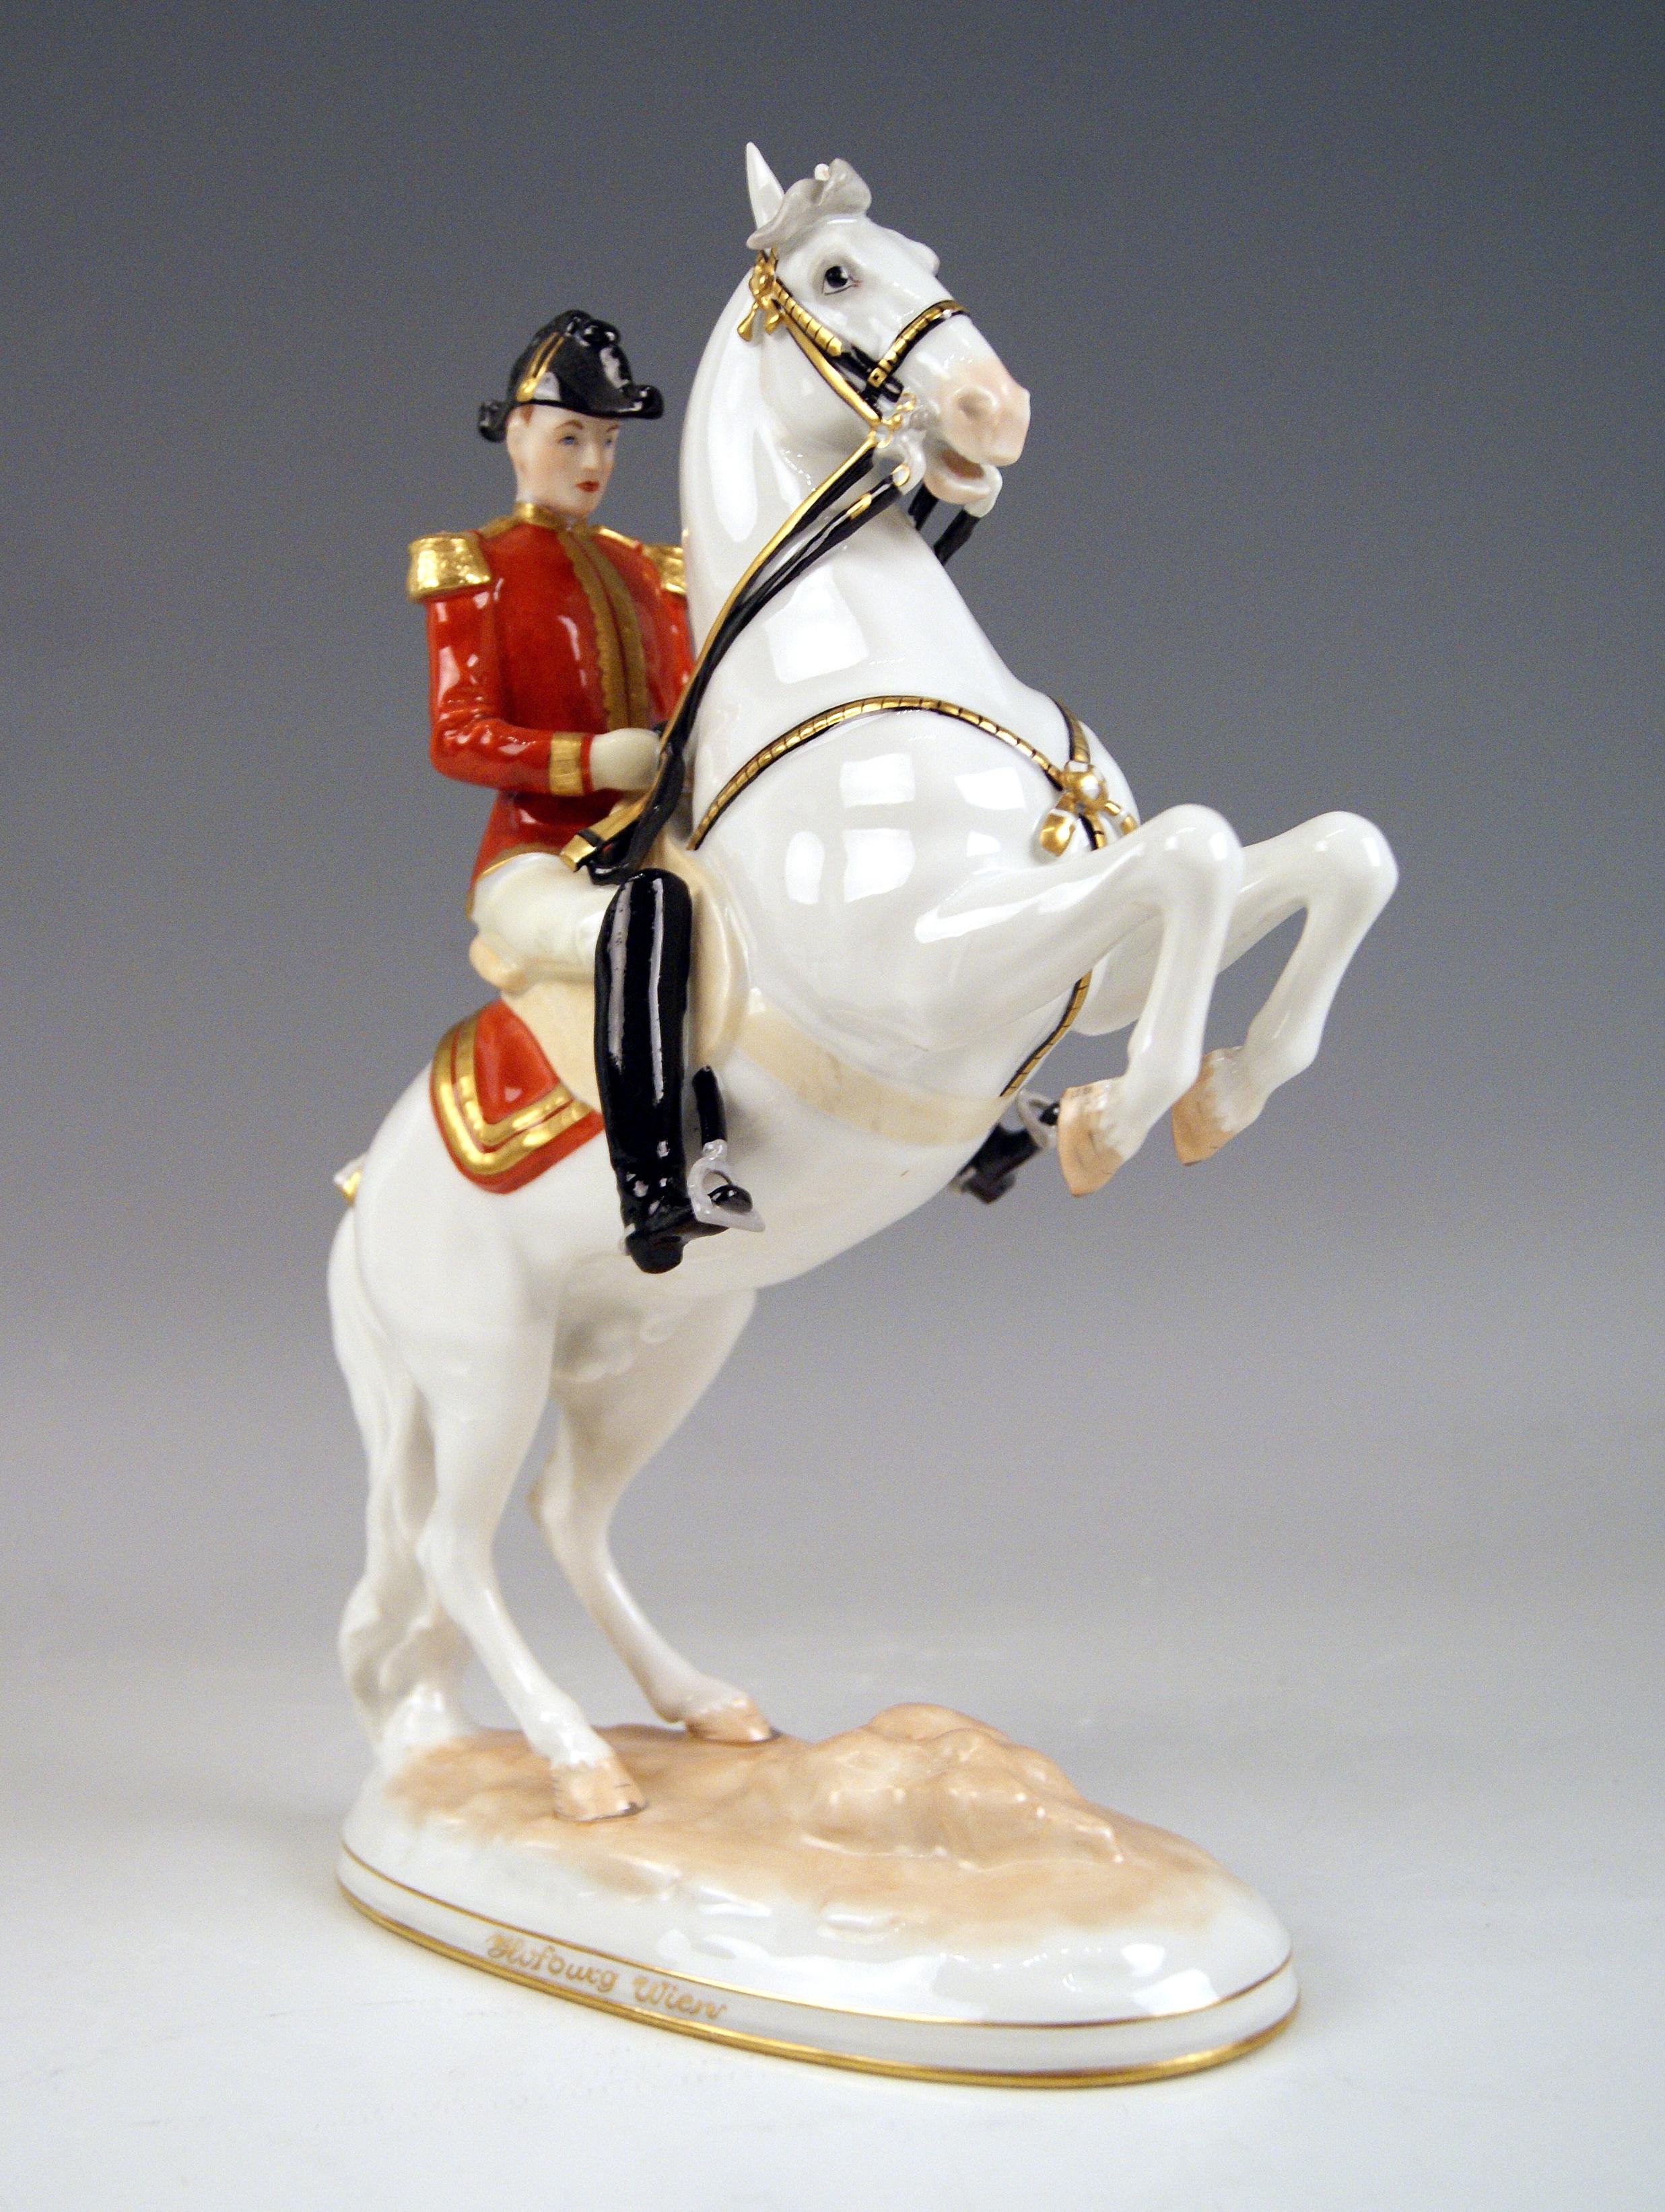 Vienna Augarten Horse Spanish Riding School
Figurine Type: Courbette

The rider - conducting the horse by the reins - sits on the jumping white Lipizzan which is rearing up. 
The jumping horse depicts a figurine which is called 